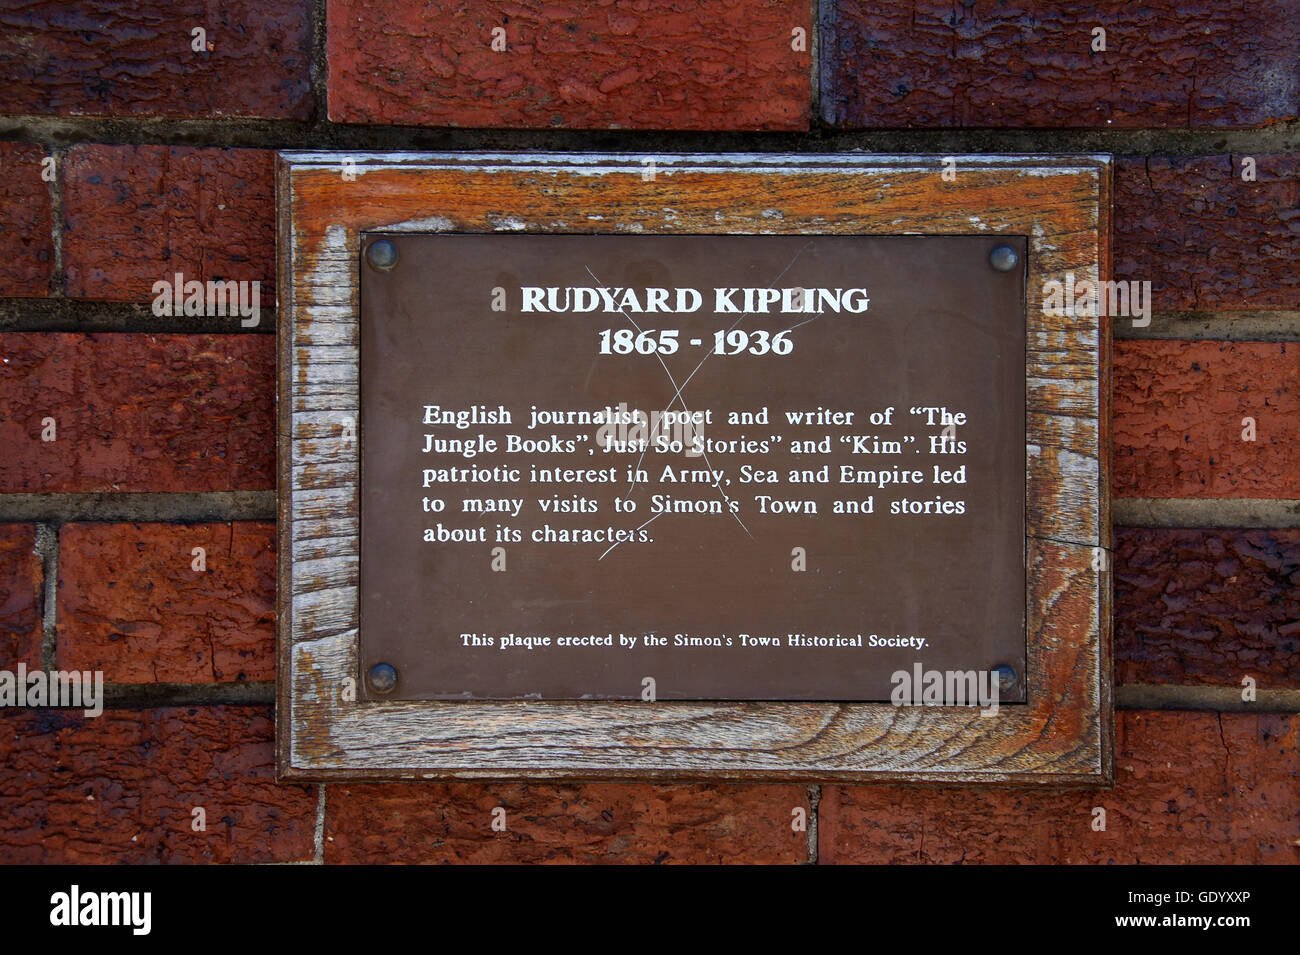 Rudyard Kipling plaque at Simons Town in South Africa Stock Photo - Alamy